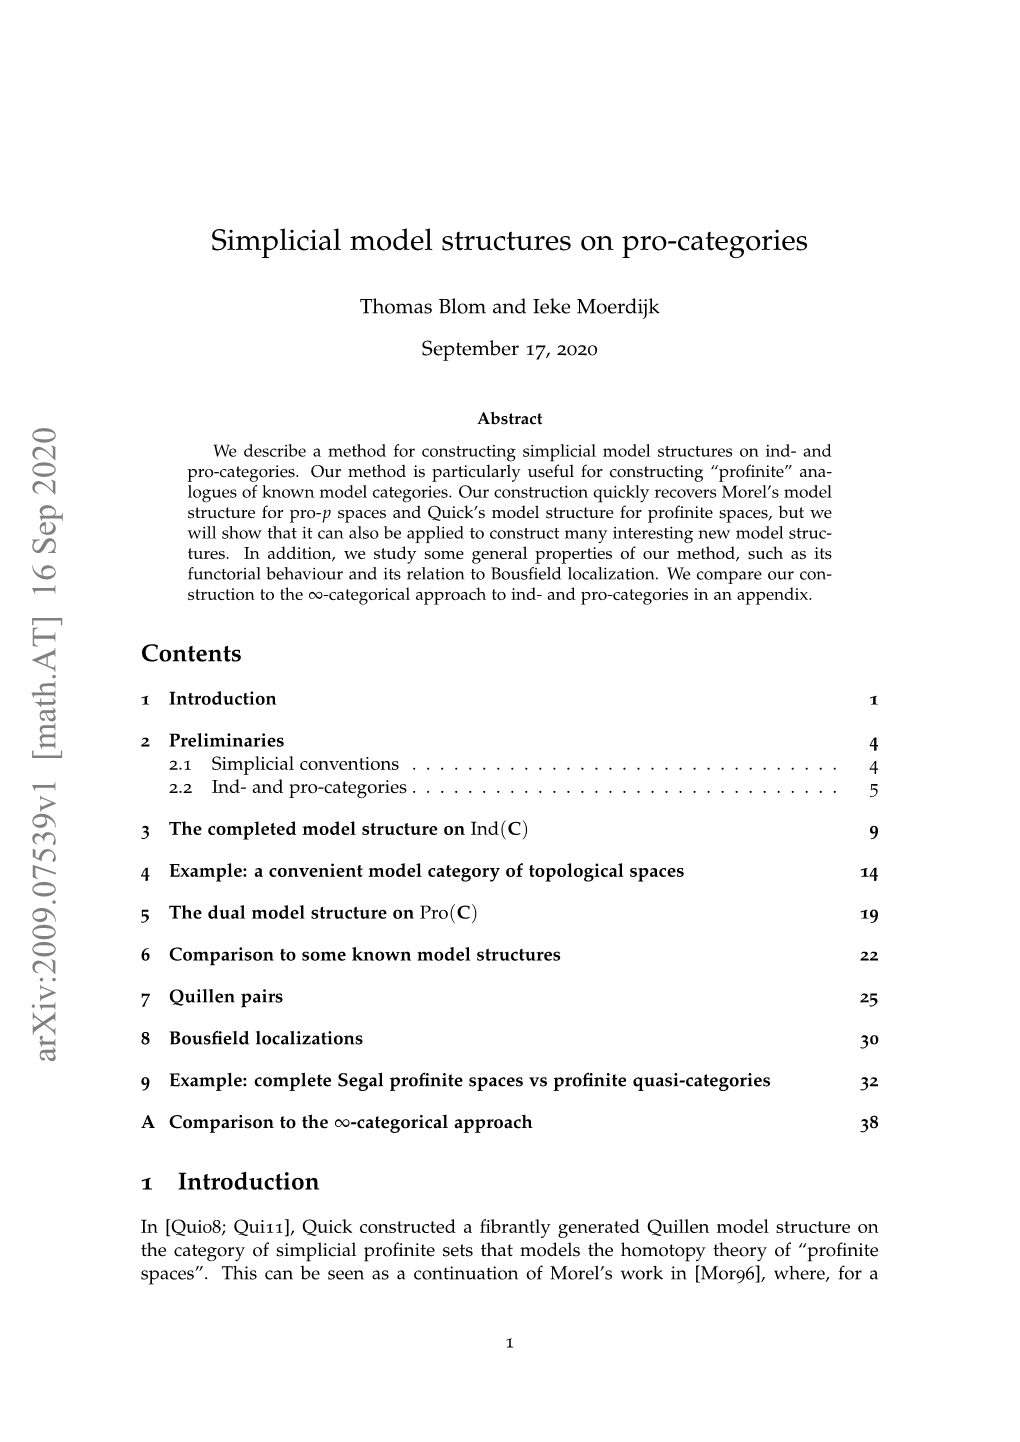 Simplicial Model Structures on Pro-Categories